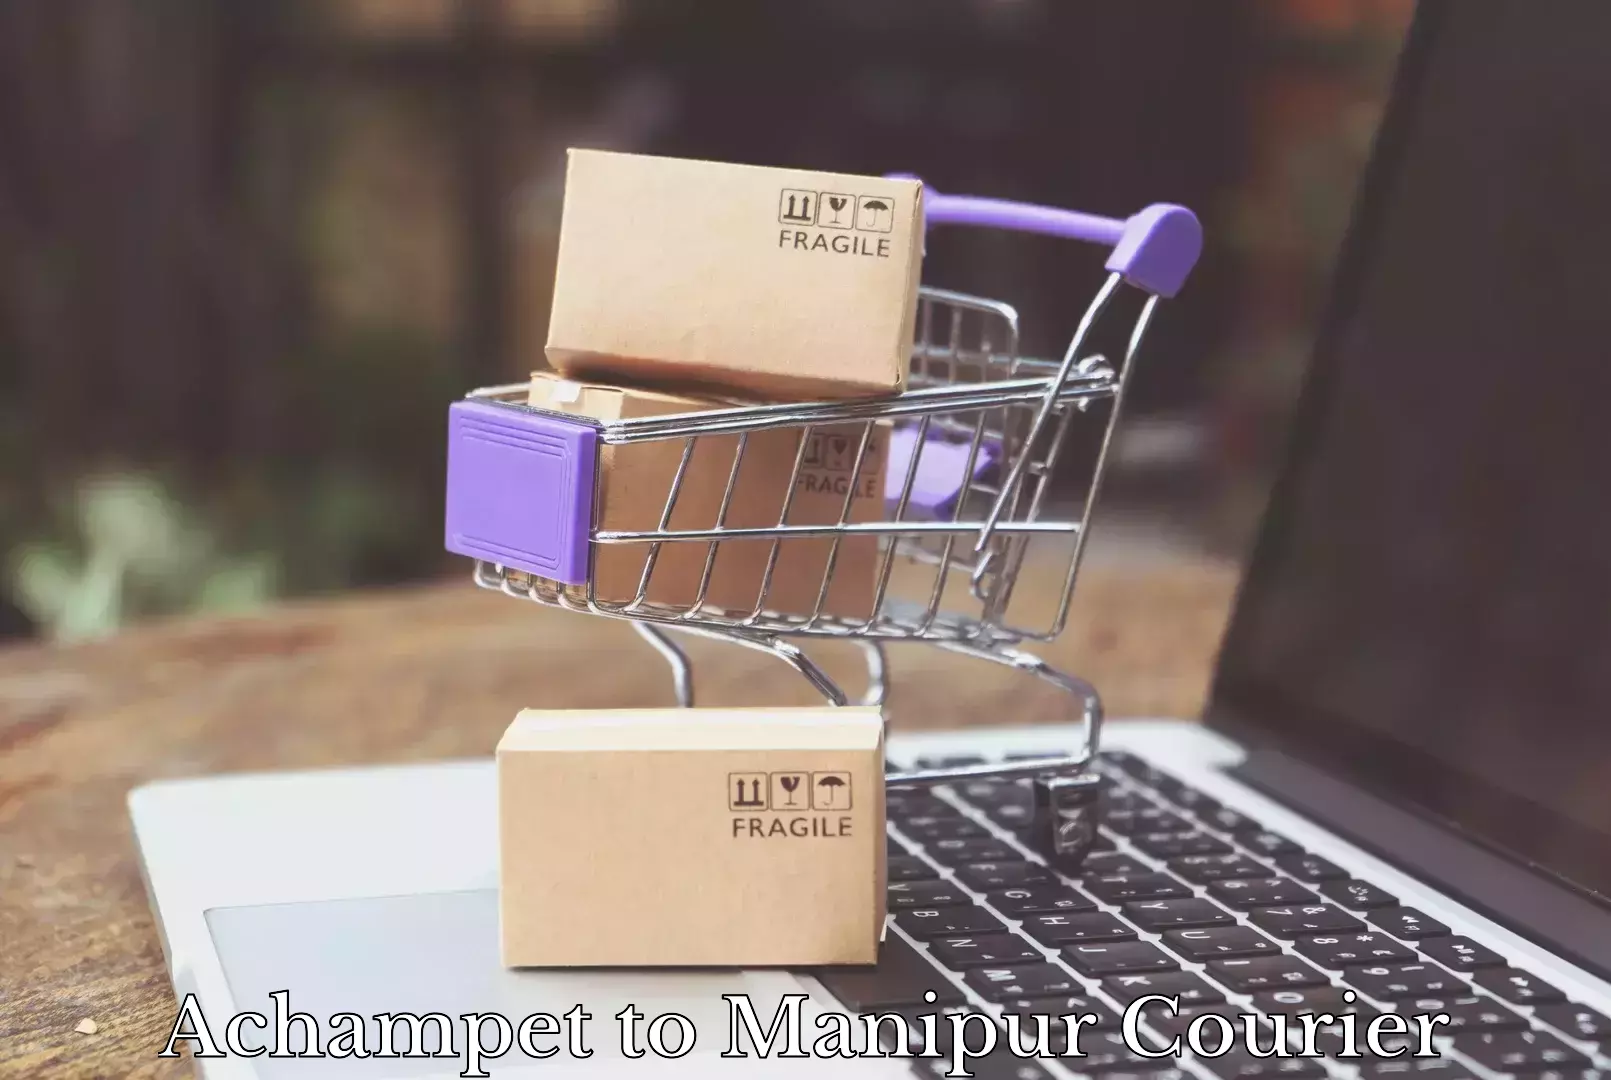 Multi-city courier Achampet to Manipur